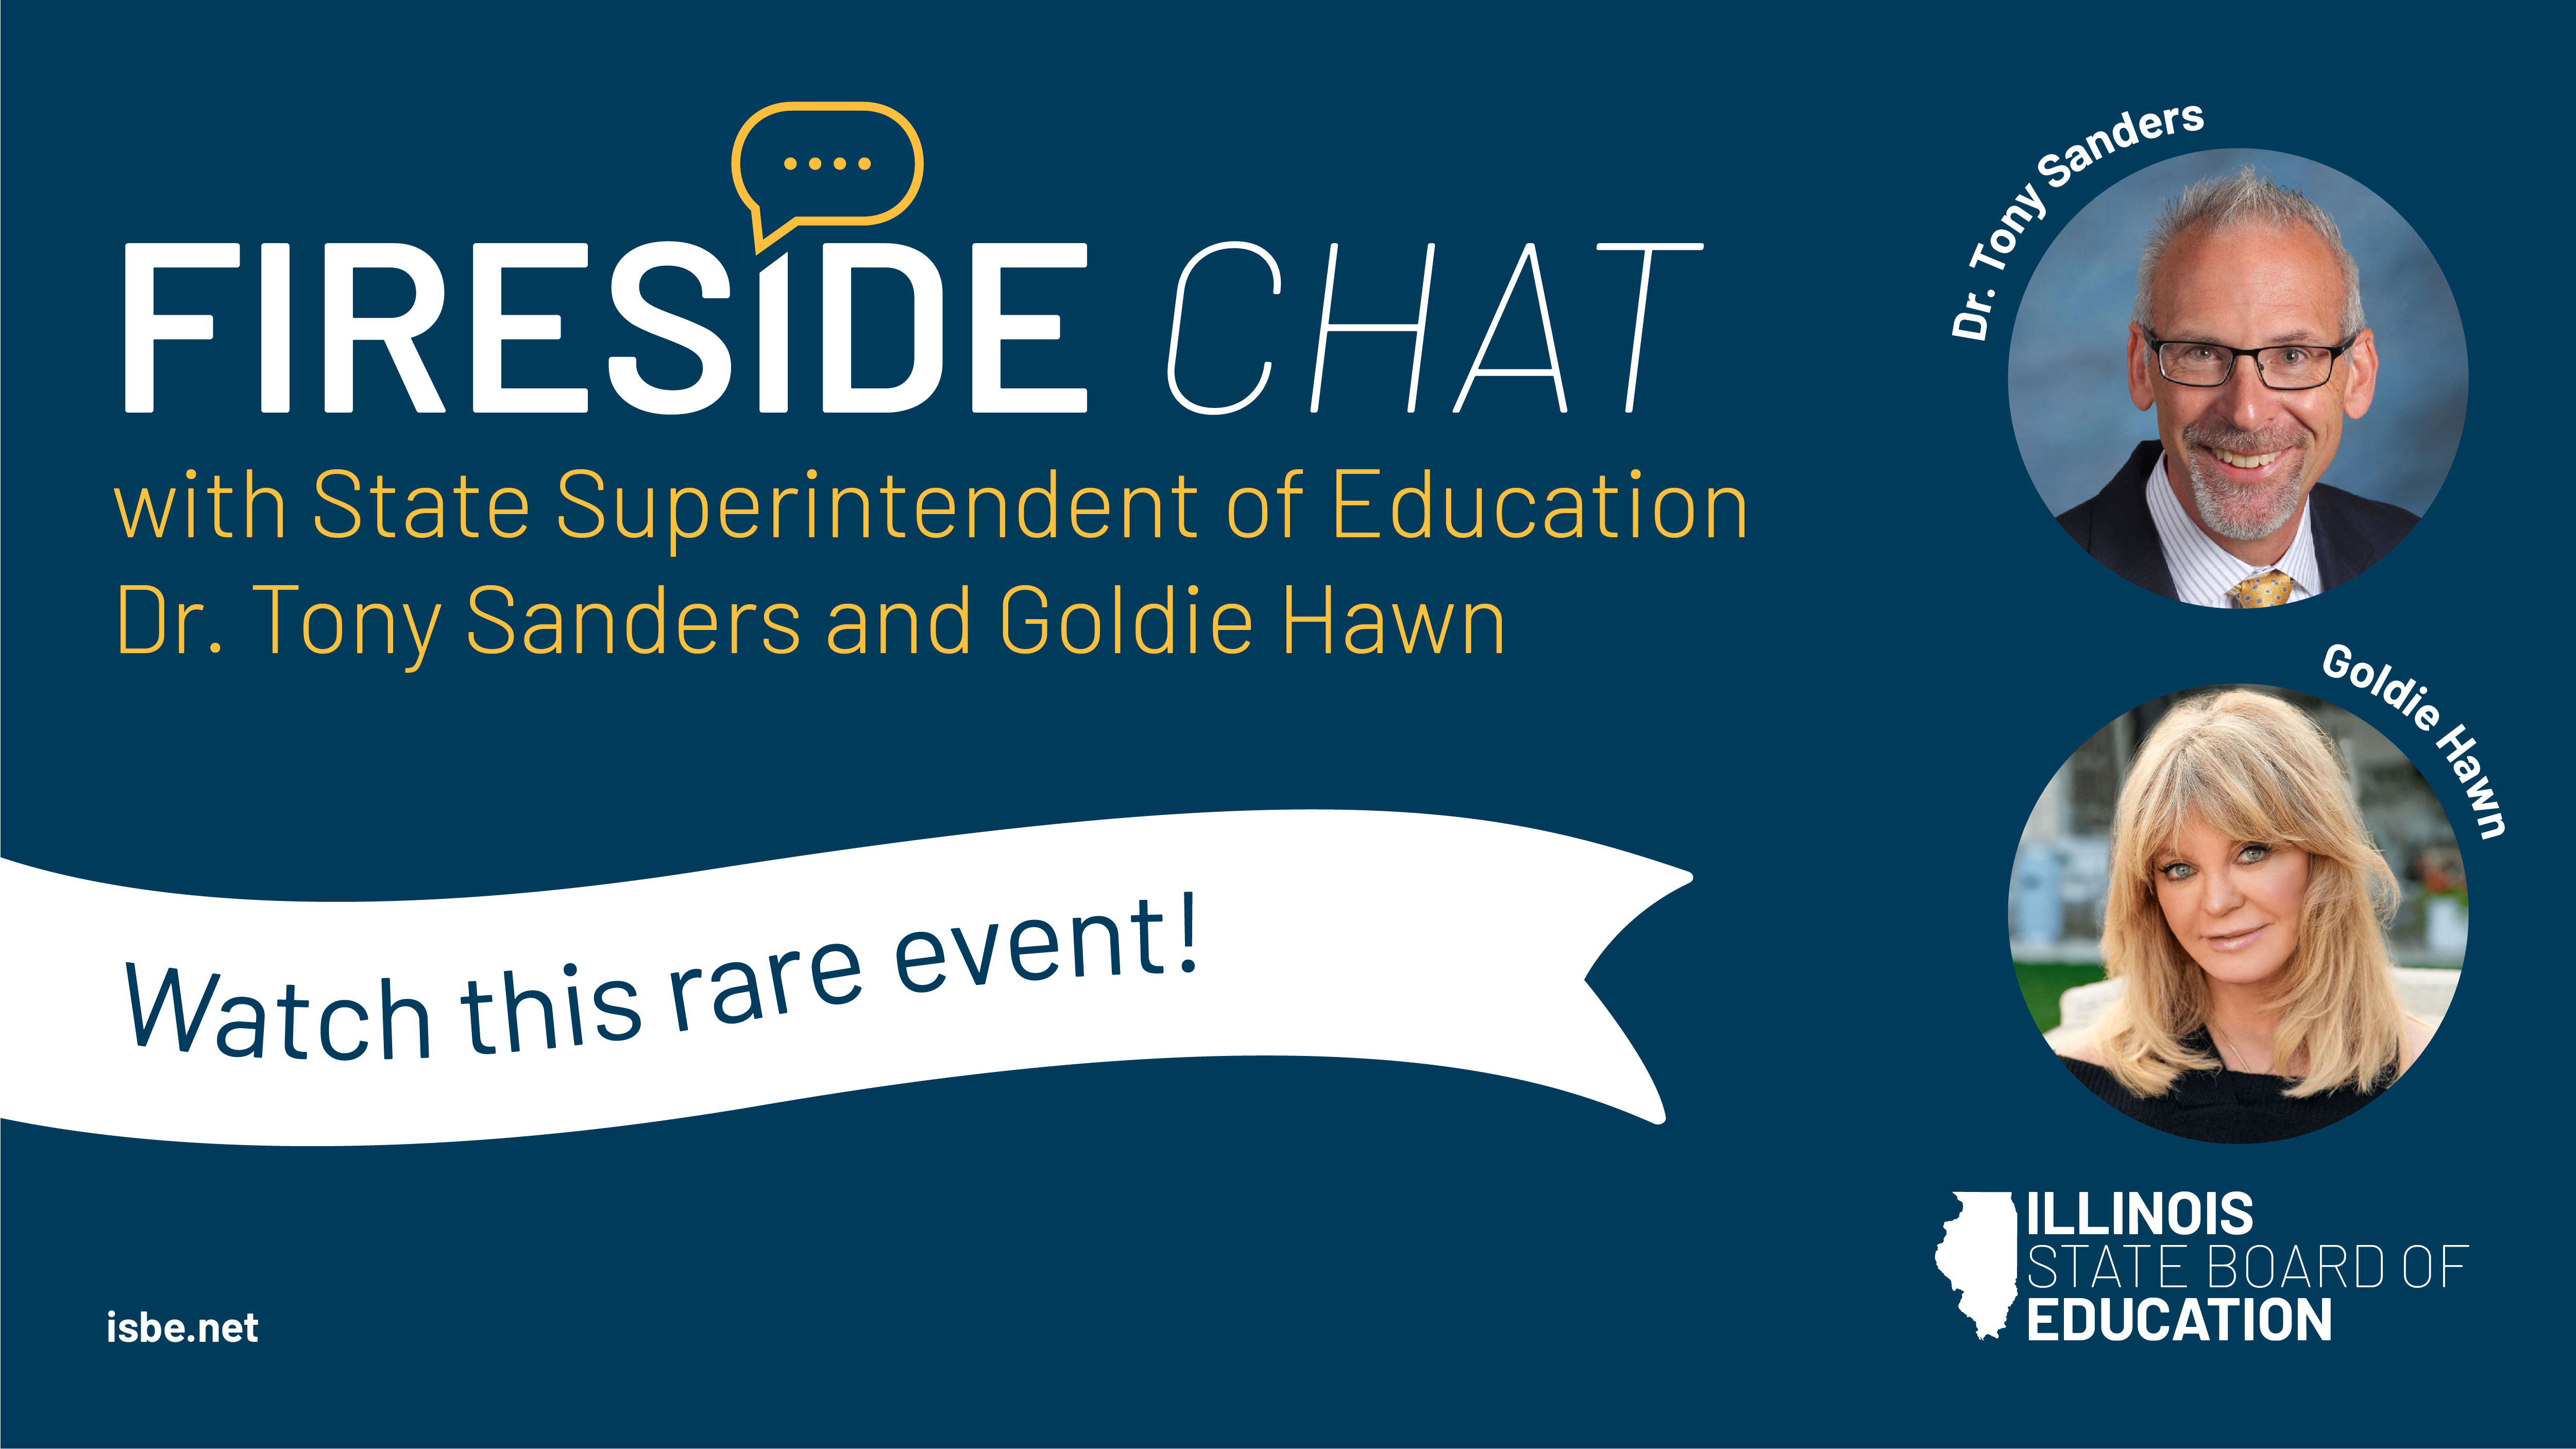 Watch the Fireside Chat with State Superintendent of Education Dr. Tony Sanders and Goldie Hawn is 3 p.m. on March 4. This is a special event for Illinois lawmakers and school administrators. Headshots of Tony and Goldie.